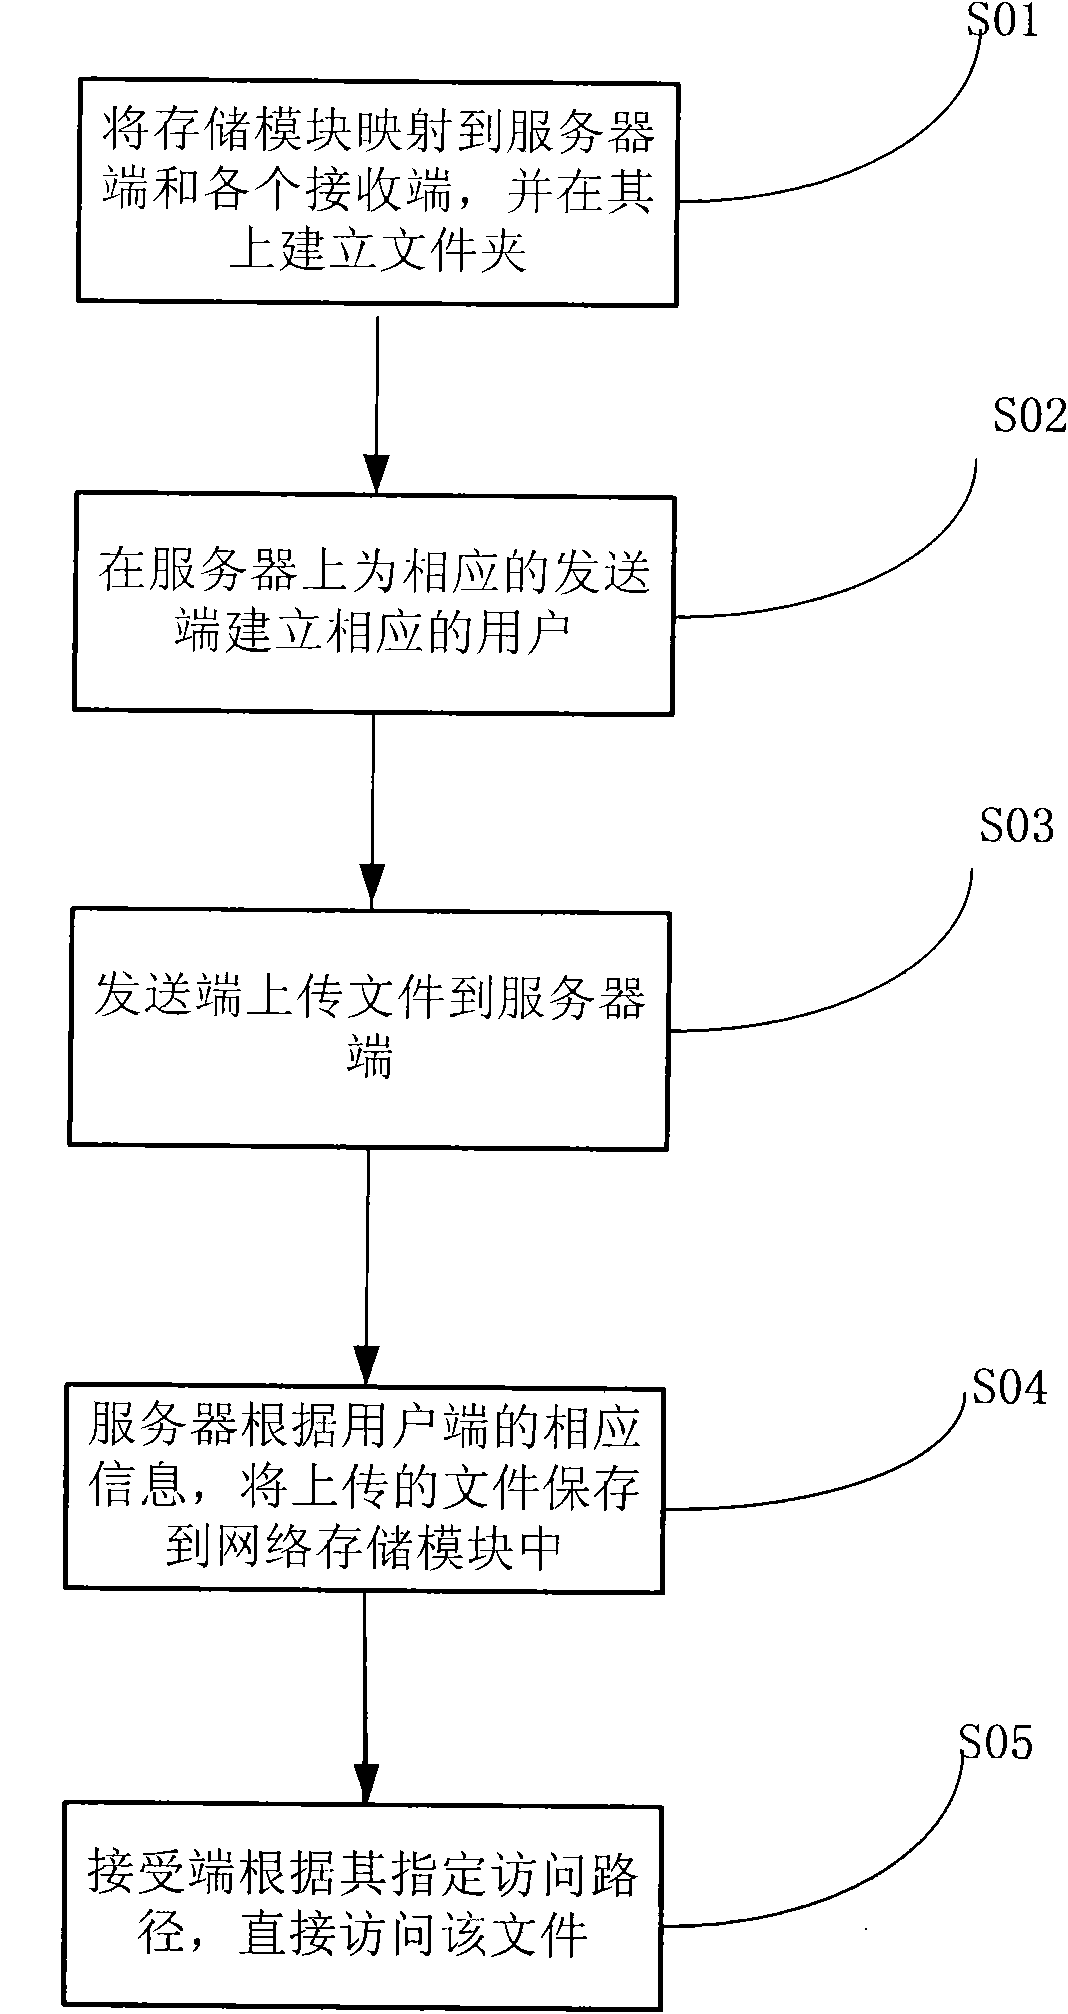 System and method for remote file transfer